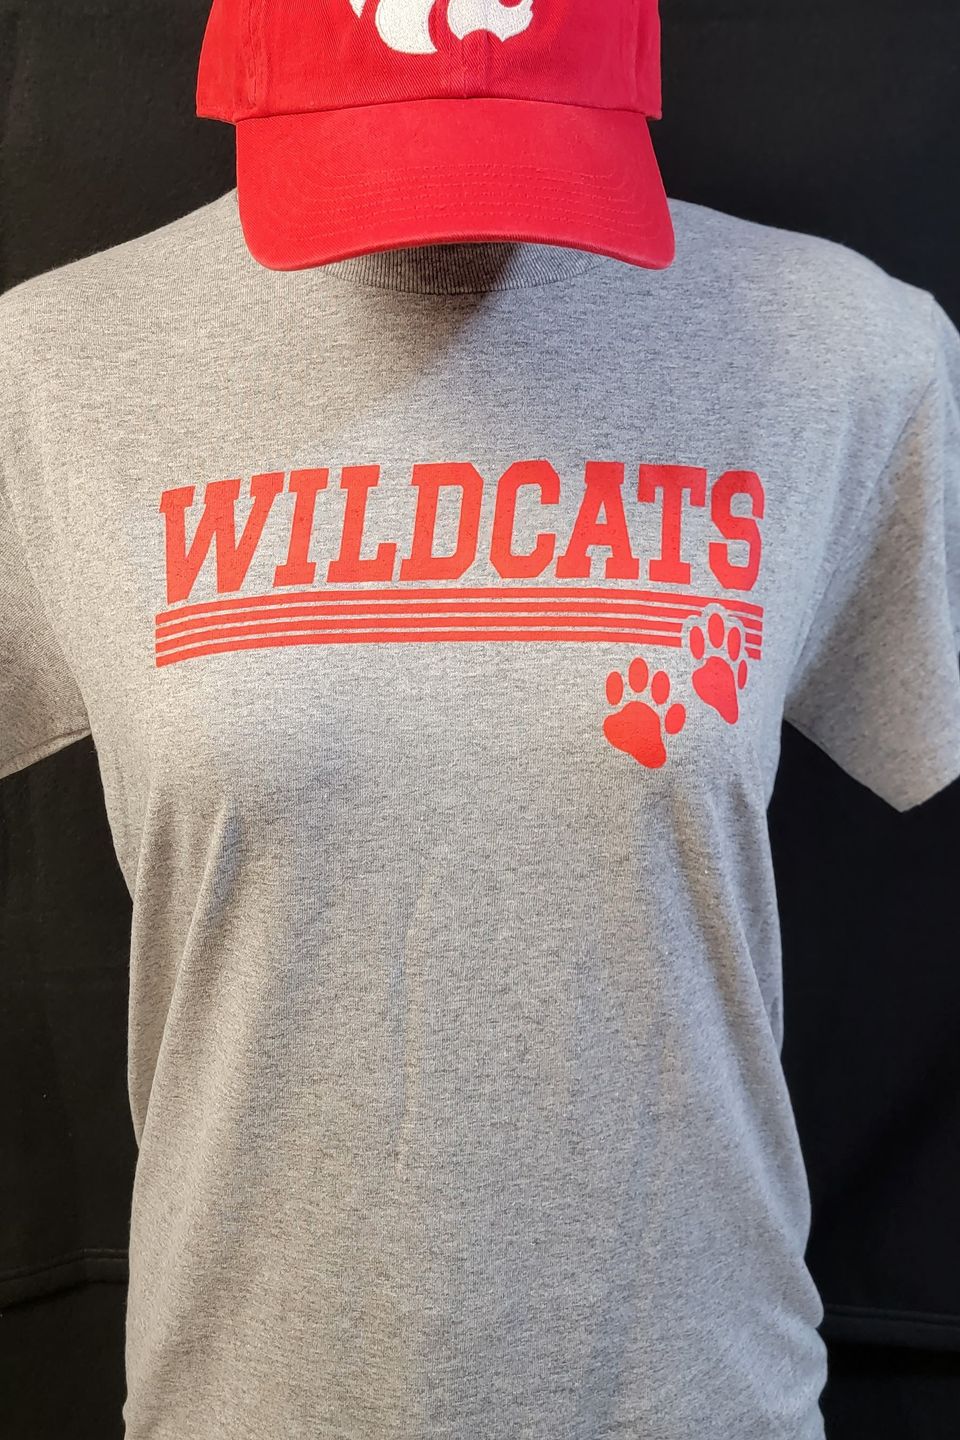 Example of Direct to Film (DTF) transfer - Wildcats logo on a gray t-shirt, embroidered & logo cap 